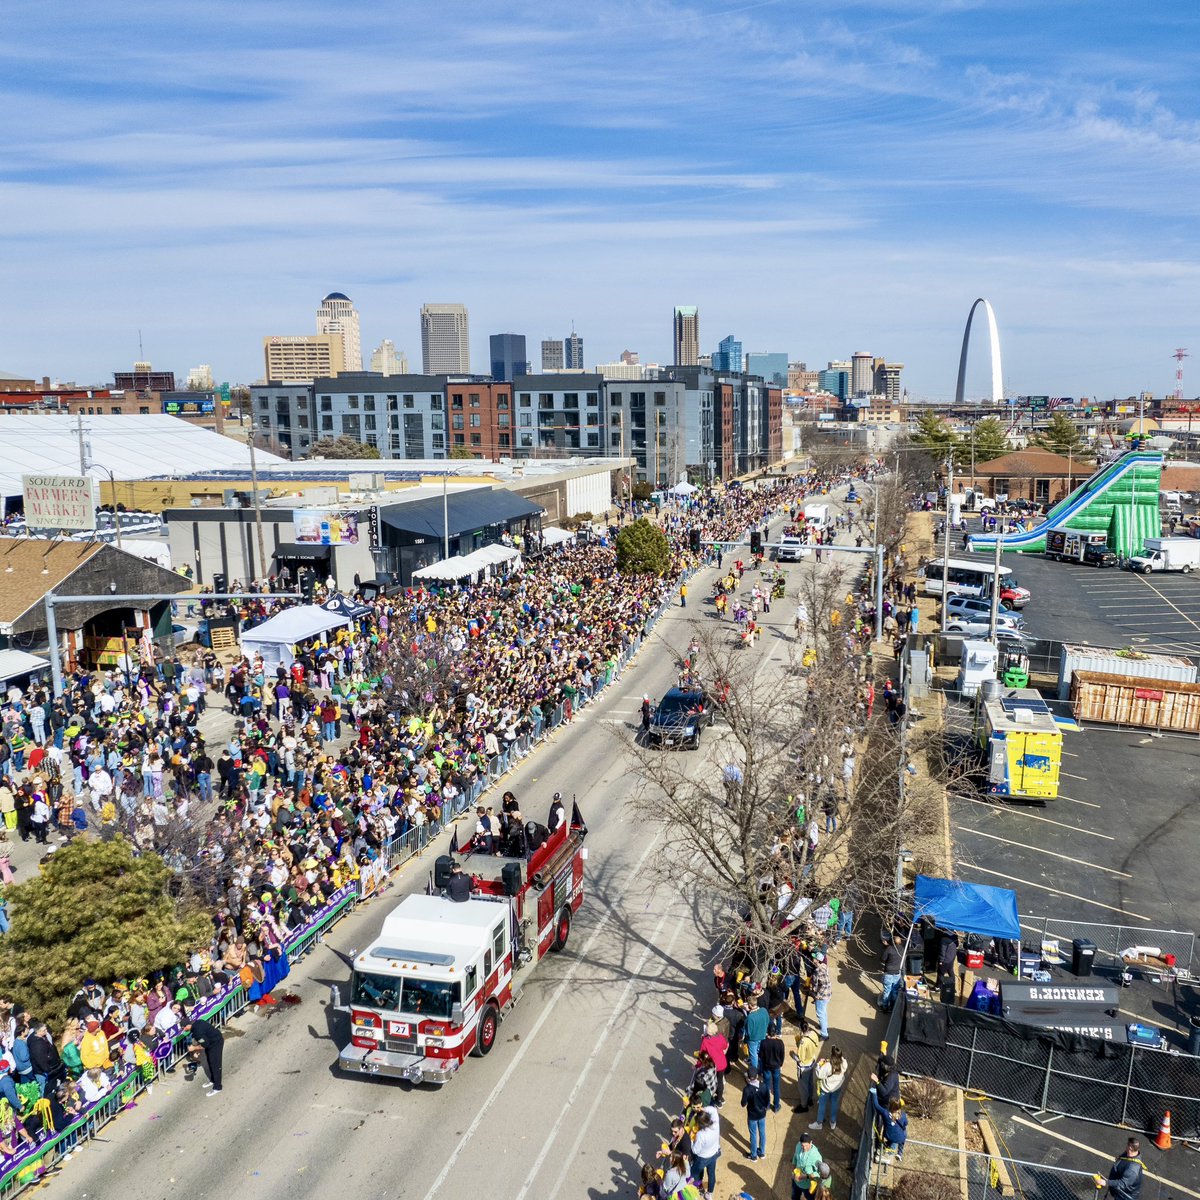 A beautiful afternoon to celebrate Mardi Gras with the Bud Light Grand Parade in Soulard! 💜💛💚 📸 18 FEB 2023